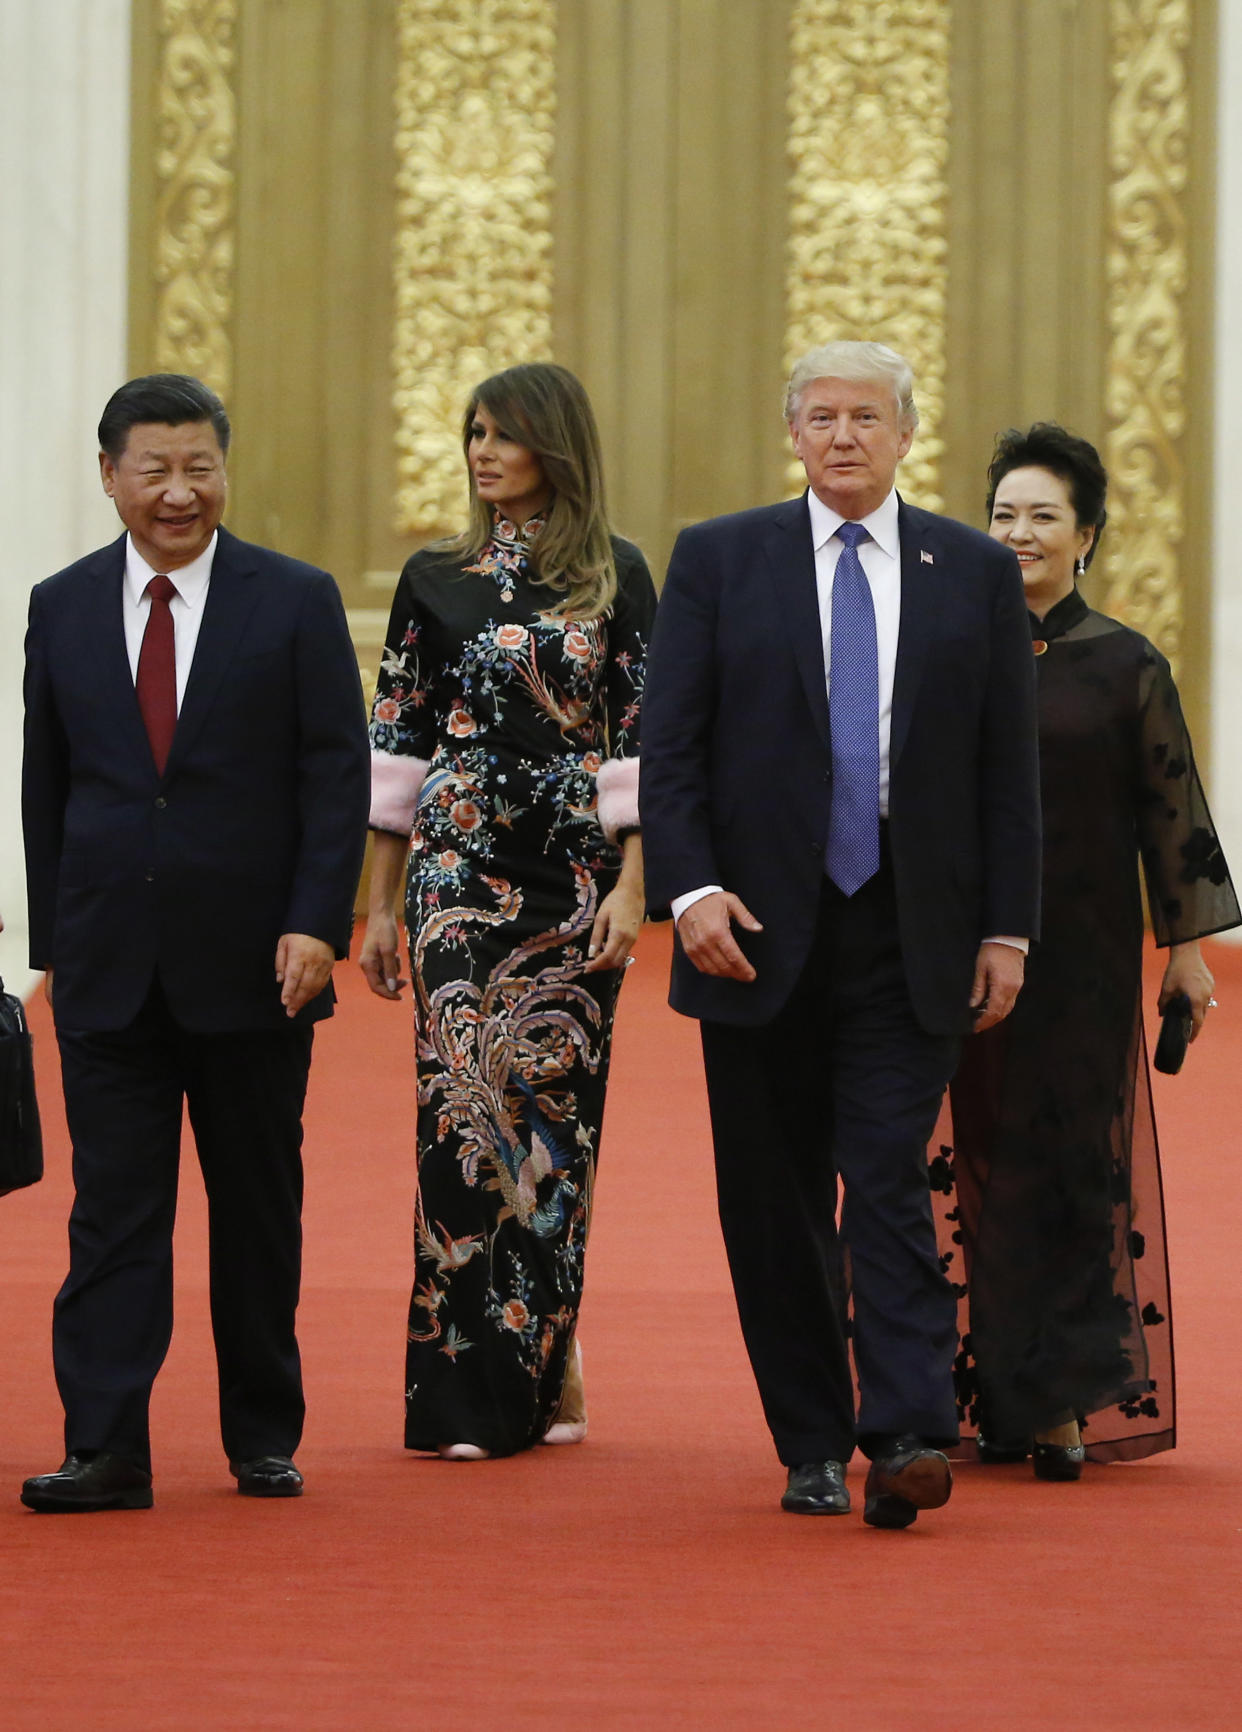 President Trump and first lady Melania Trump arrive for the state dinner with Chinese President Xi Jinping and China’s first lady, Peng Liyuan, at the Great Hall of the People in Beijing on Nov. 9. (Photo: Thomas Peter/Pool Photo via AP)